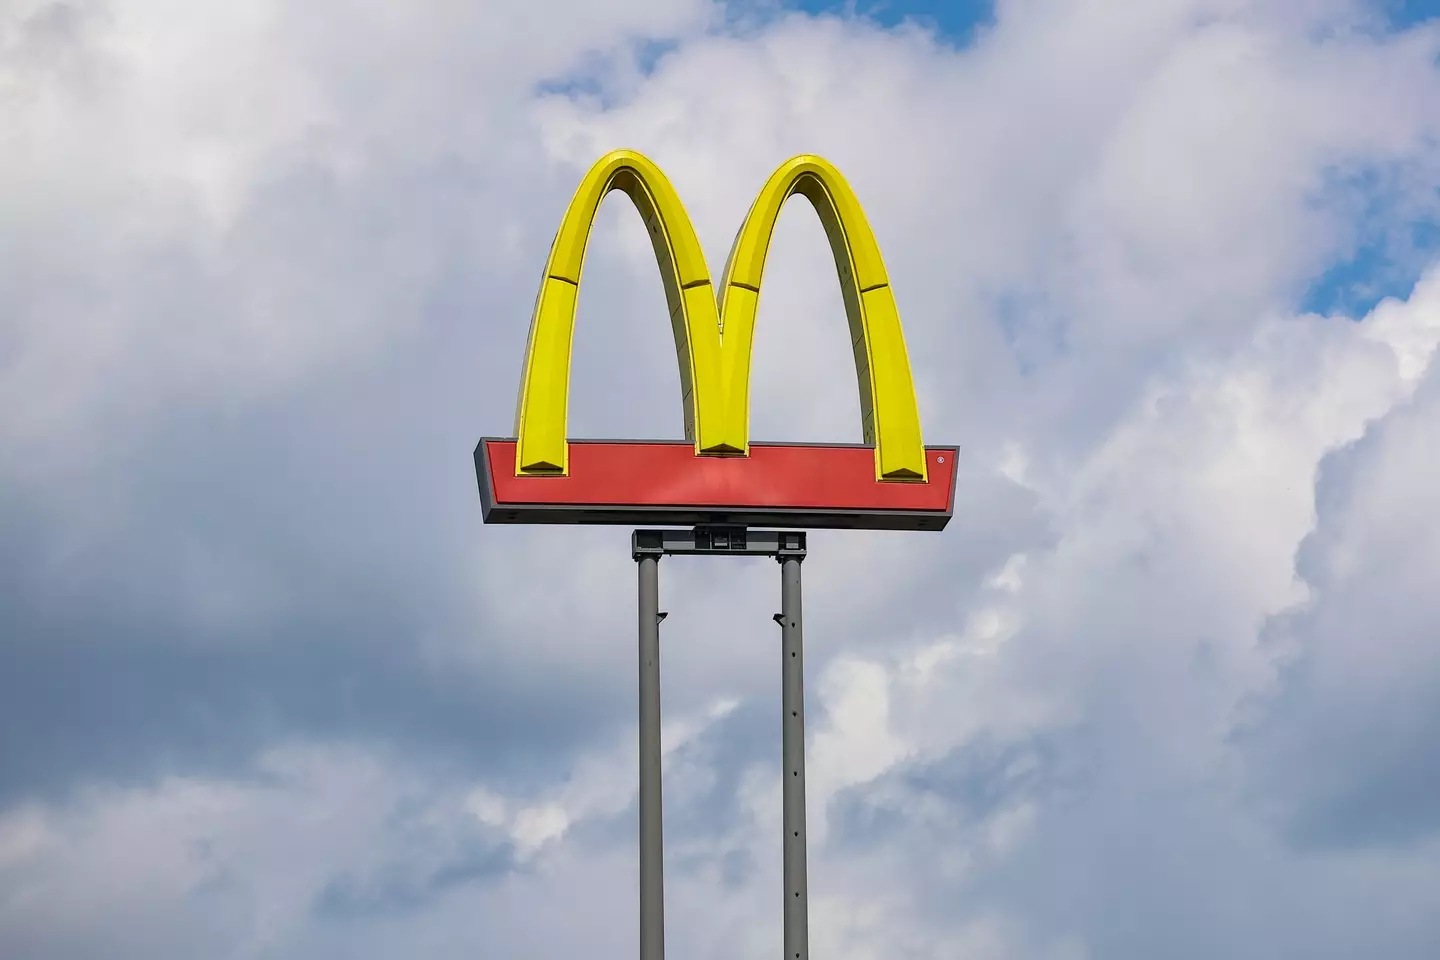 There's real psychology behind those golden arches.